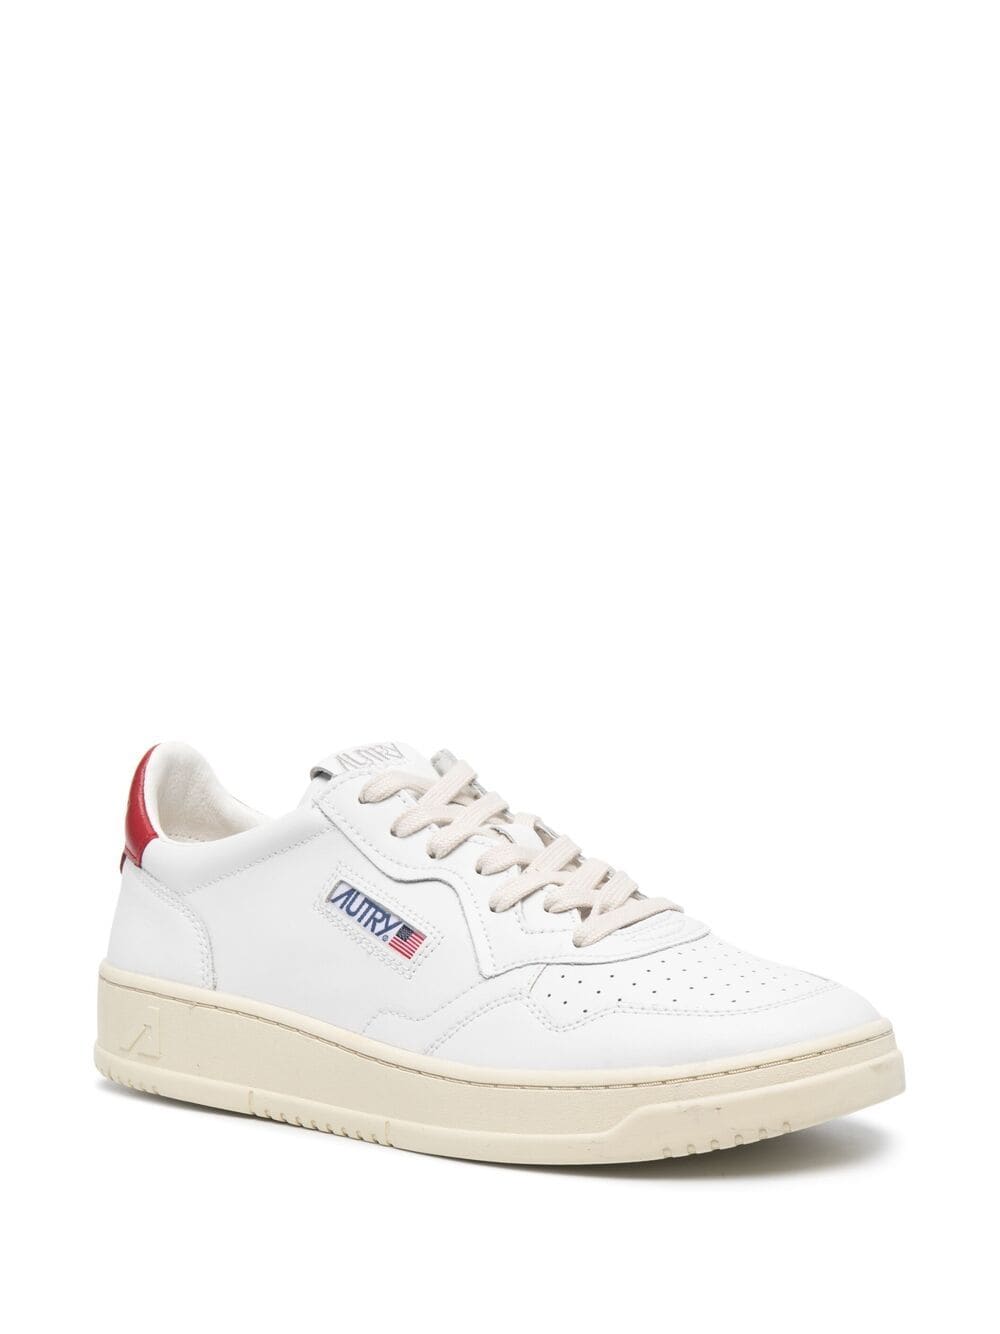 Bright white/red leather Medalist low-top sneakers